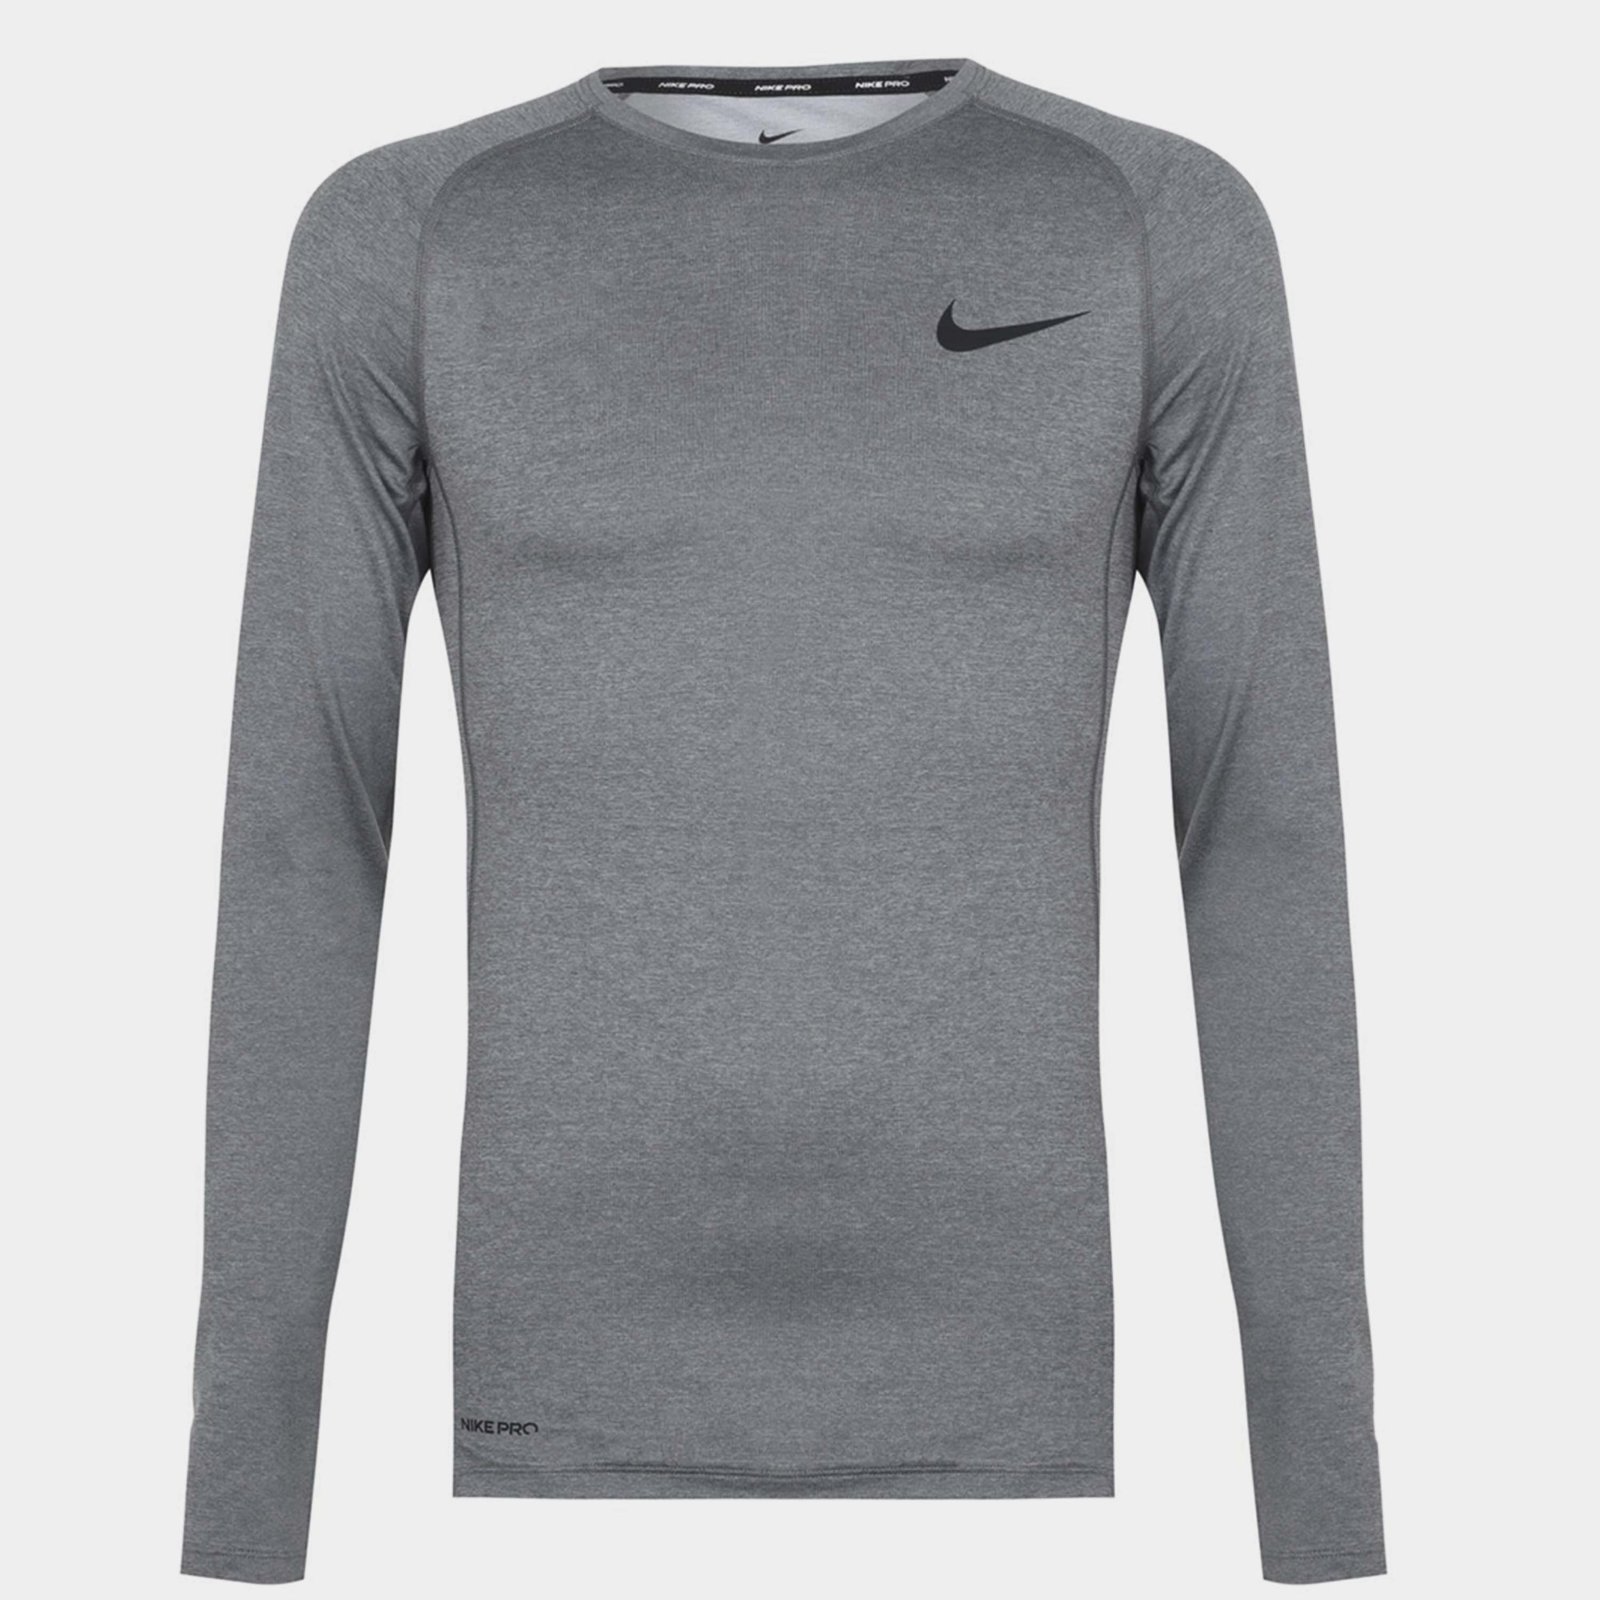 Nike Rugby: Elevate Your Game with Our High-Performance Sportswear ...